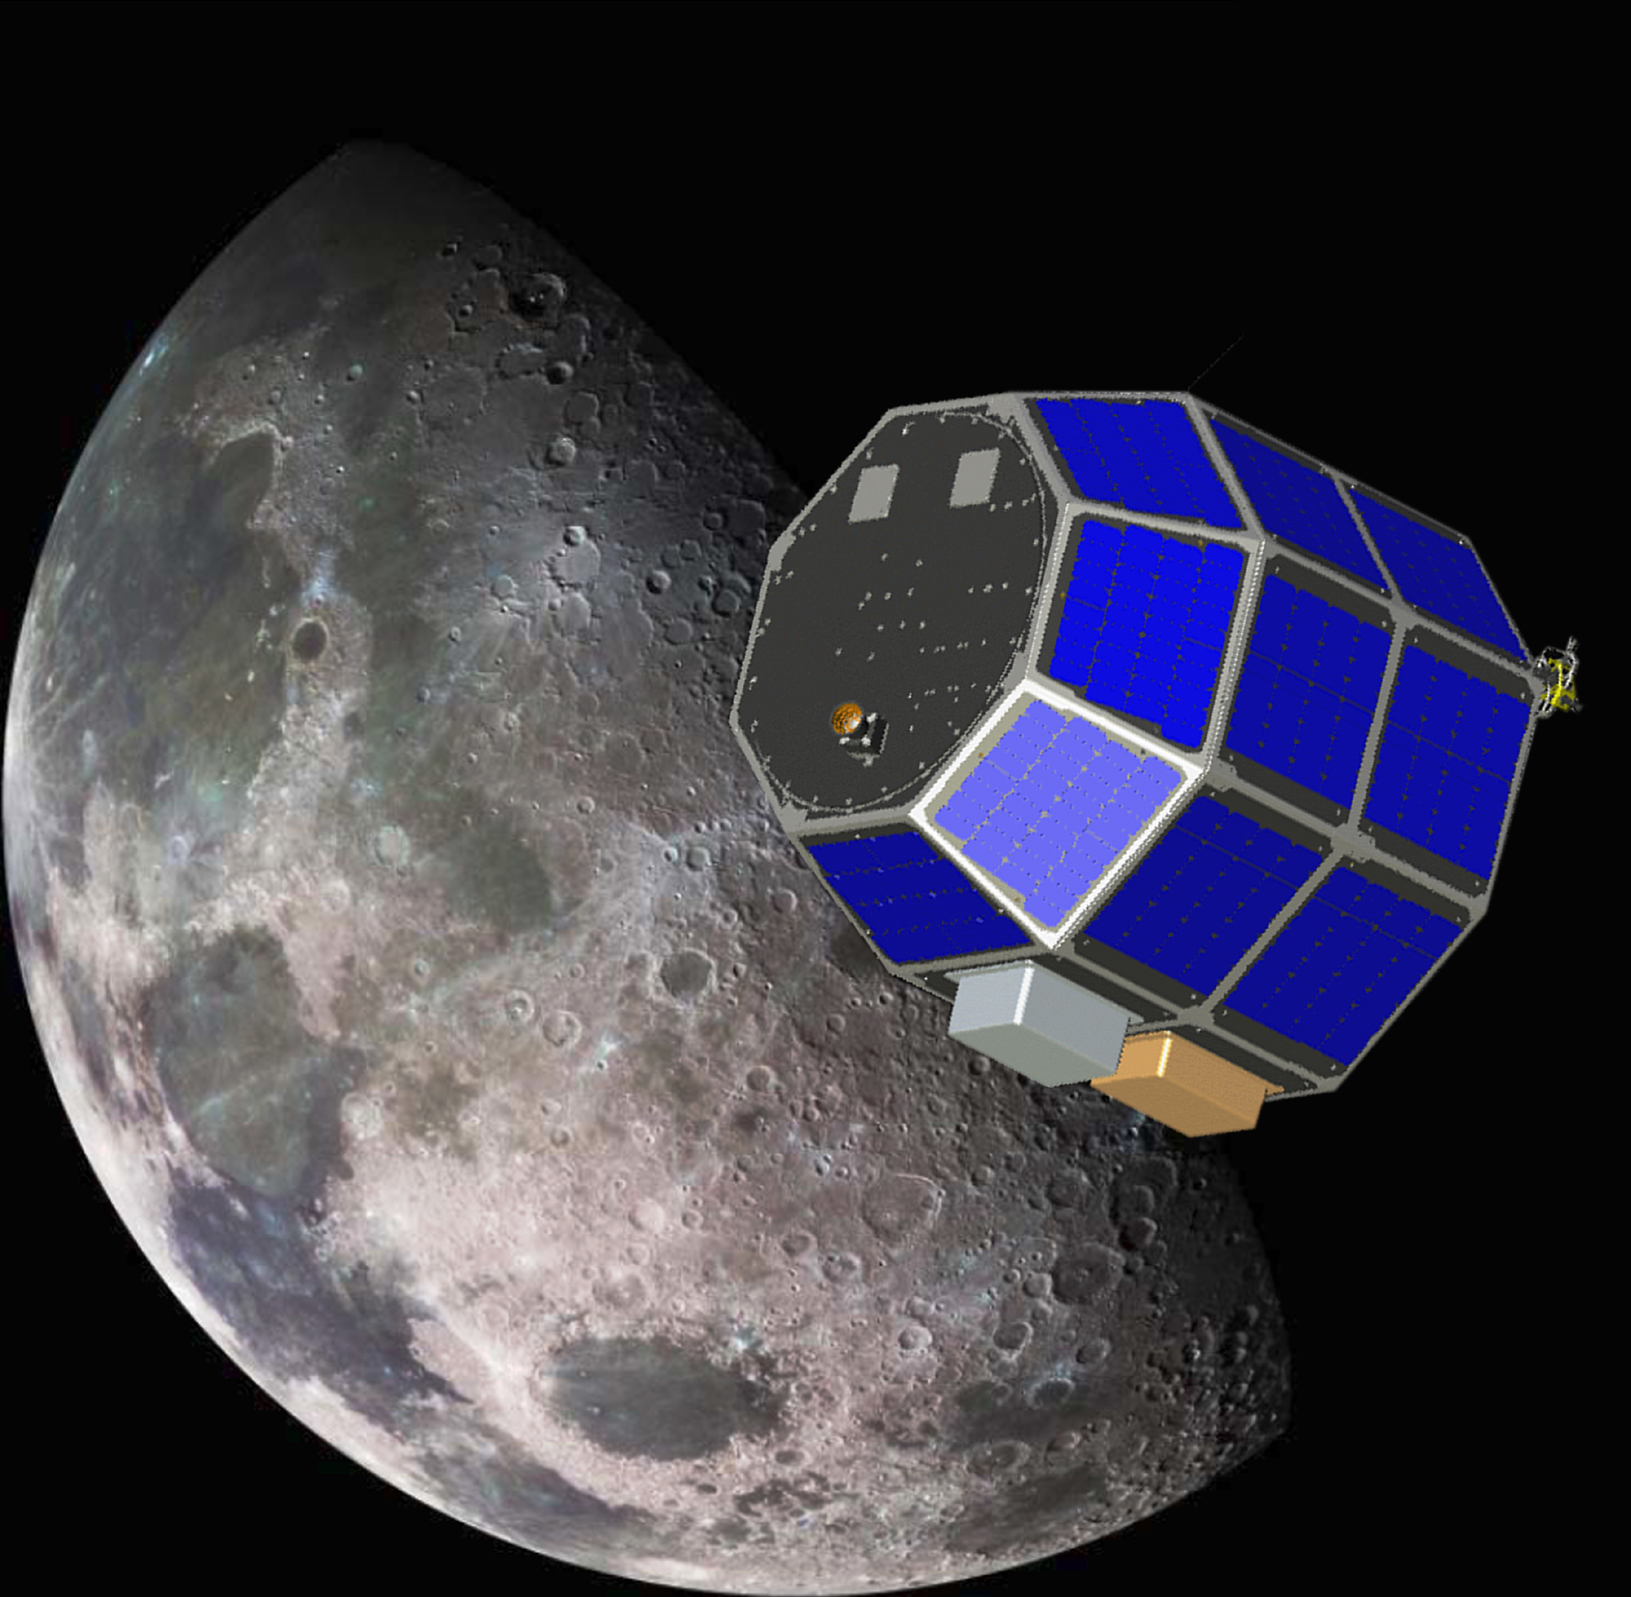 The Lunar Atmosphere and Dust Environment Explorer (LADEE) is designed to study the Moon's thin exosphere and the lunar dust environment.